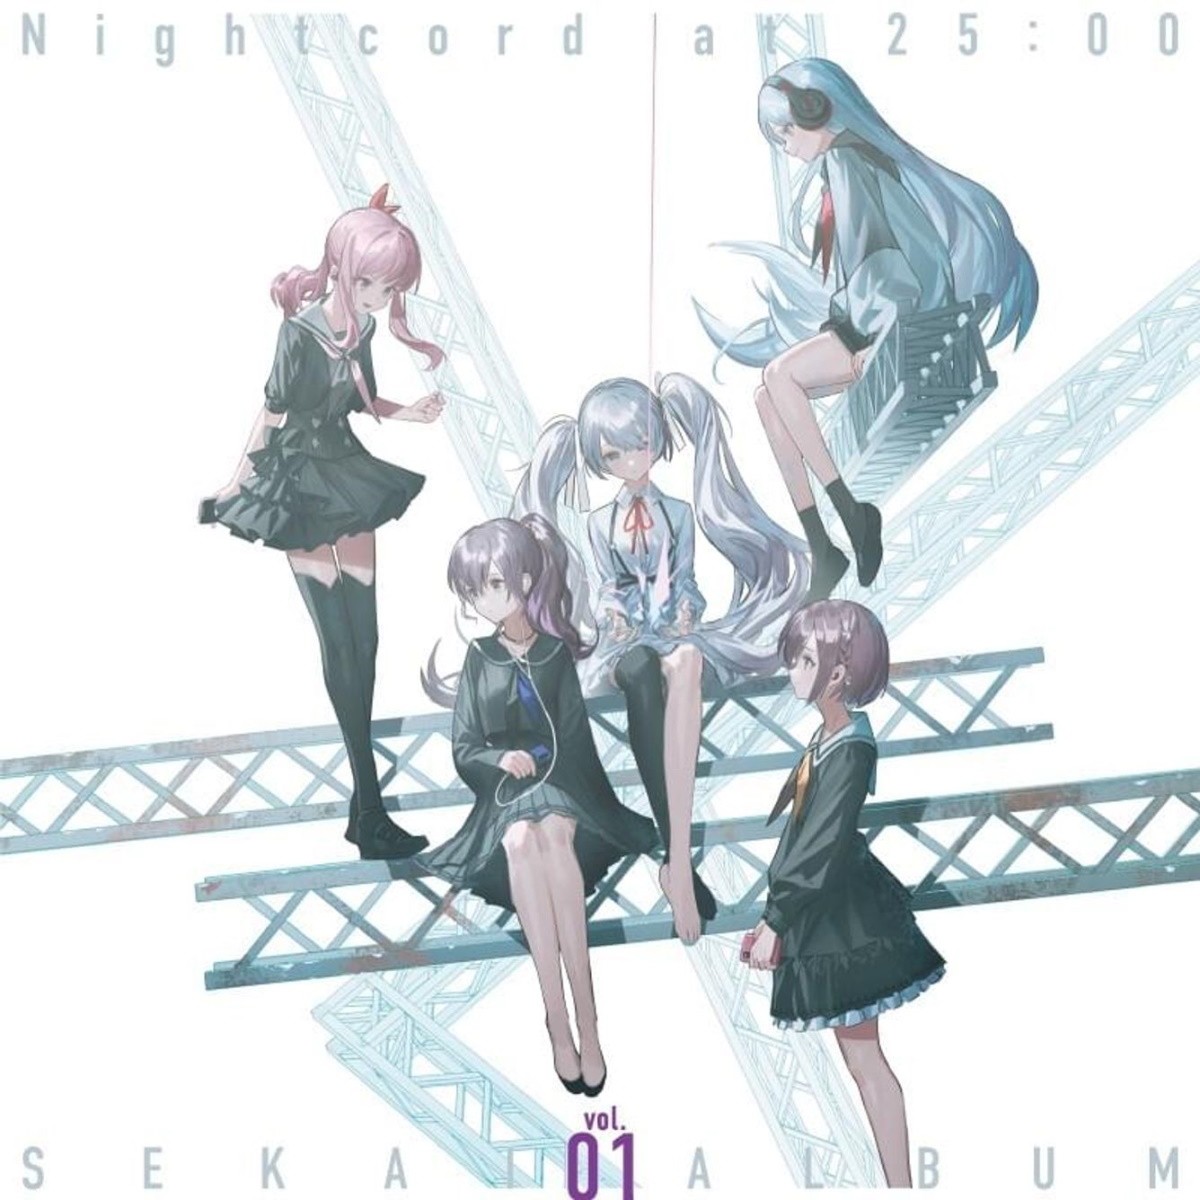 Cover for『Nightcord at 25:00 - Hello/How Are You』from the release『Nightcord at 25:00 SEKAI ALBUM vol.1』